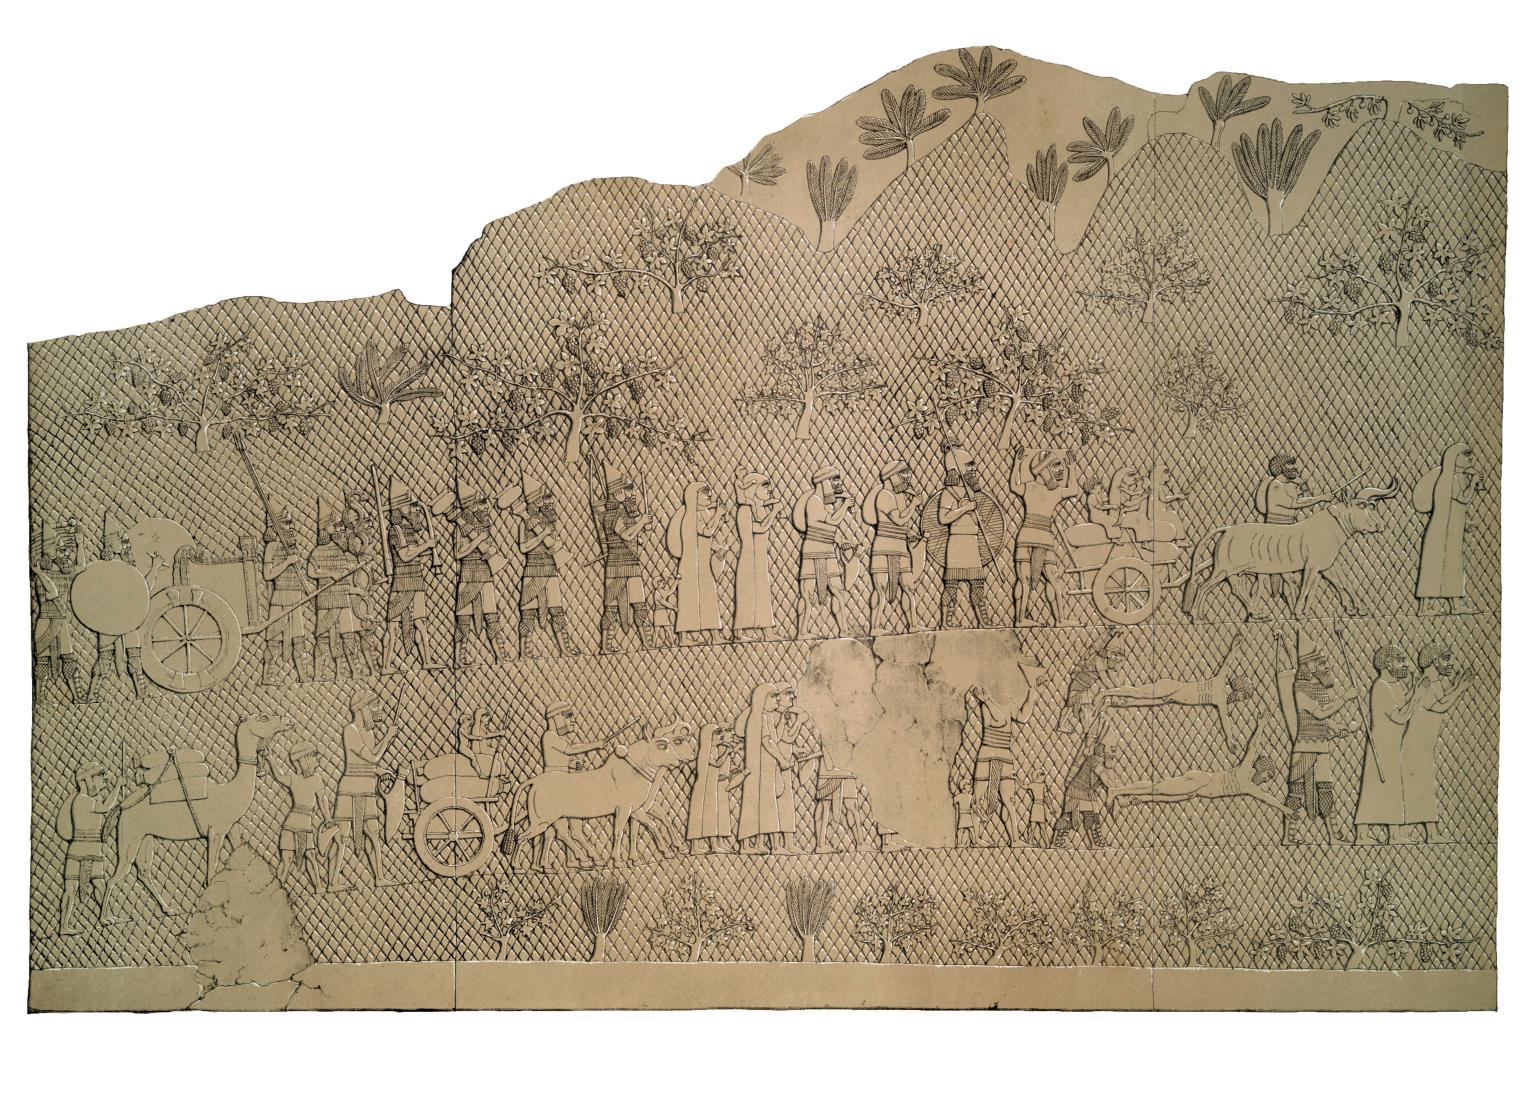 Relief of two rows of soldiers marching interspersed with women in head coverings, bulls, naked figures, and people and bundles on wagons. 